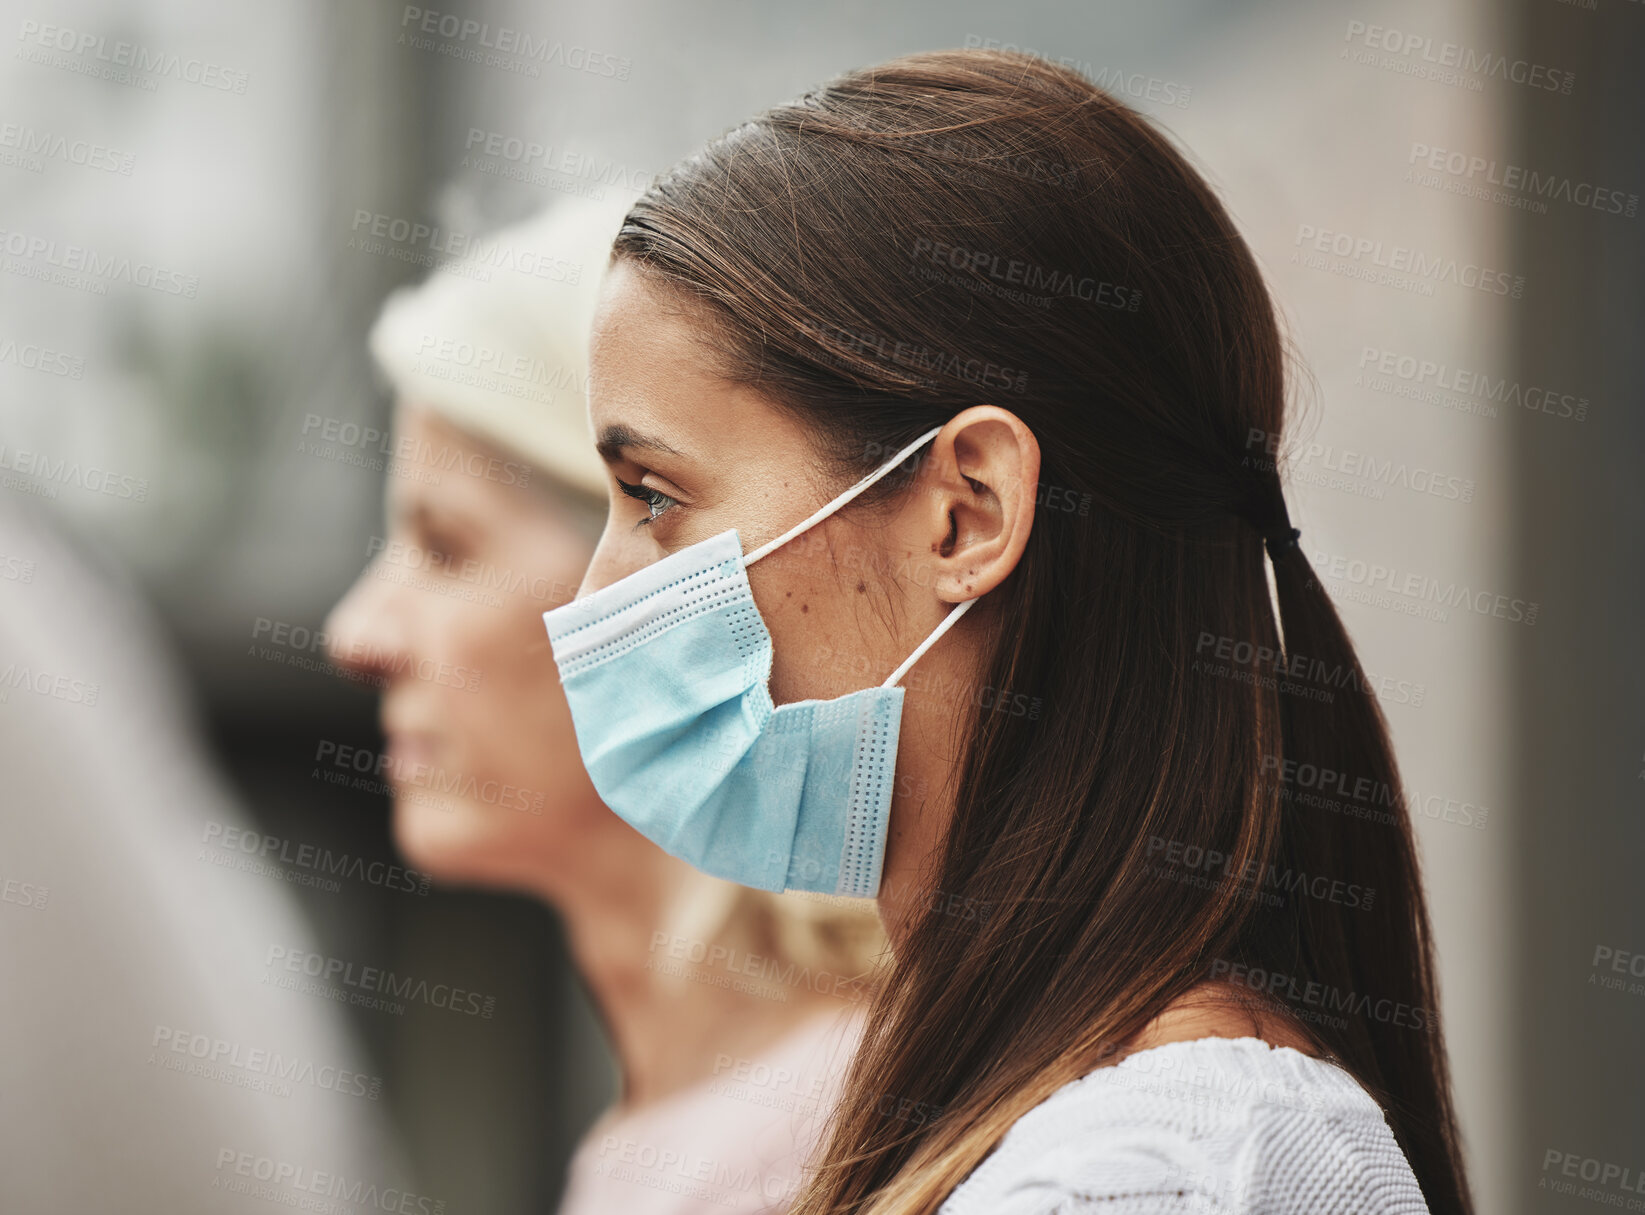 Buy stock photo Cropped shot of an attractive young woman wearing a mask while taking part in a political rally